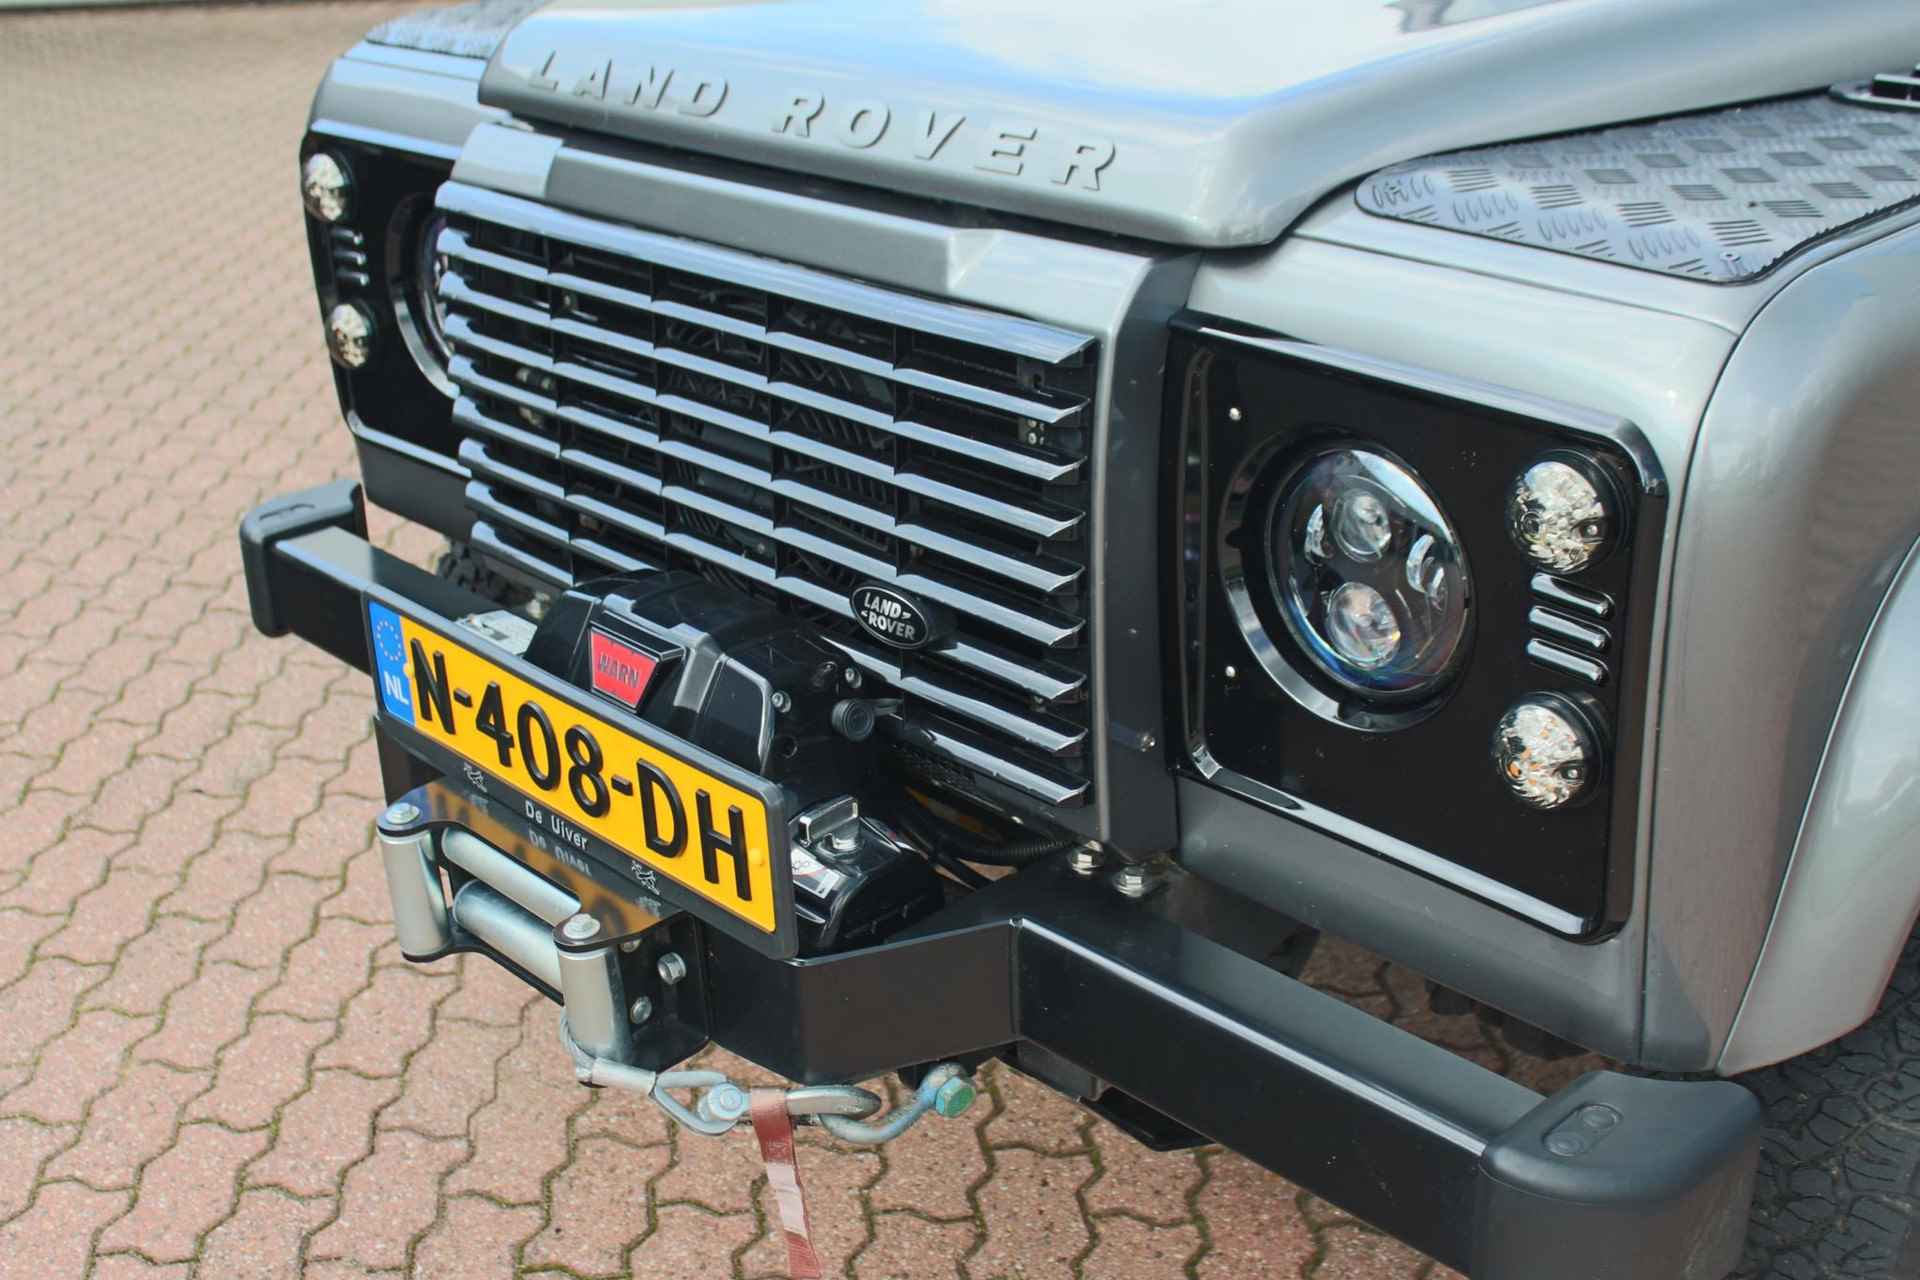 Land Rover Defender 2.4 TD 110 SW XTech „De Uiver" Special 7-Persoons 165 Pk 440 Nm + Cruise Control - 4/40